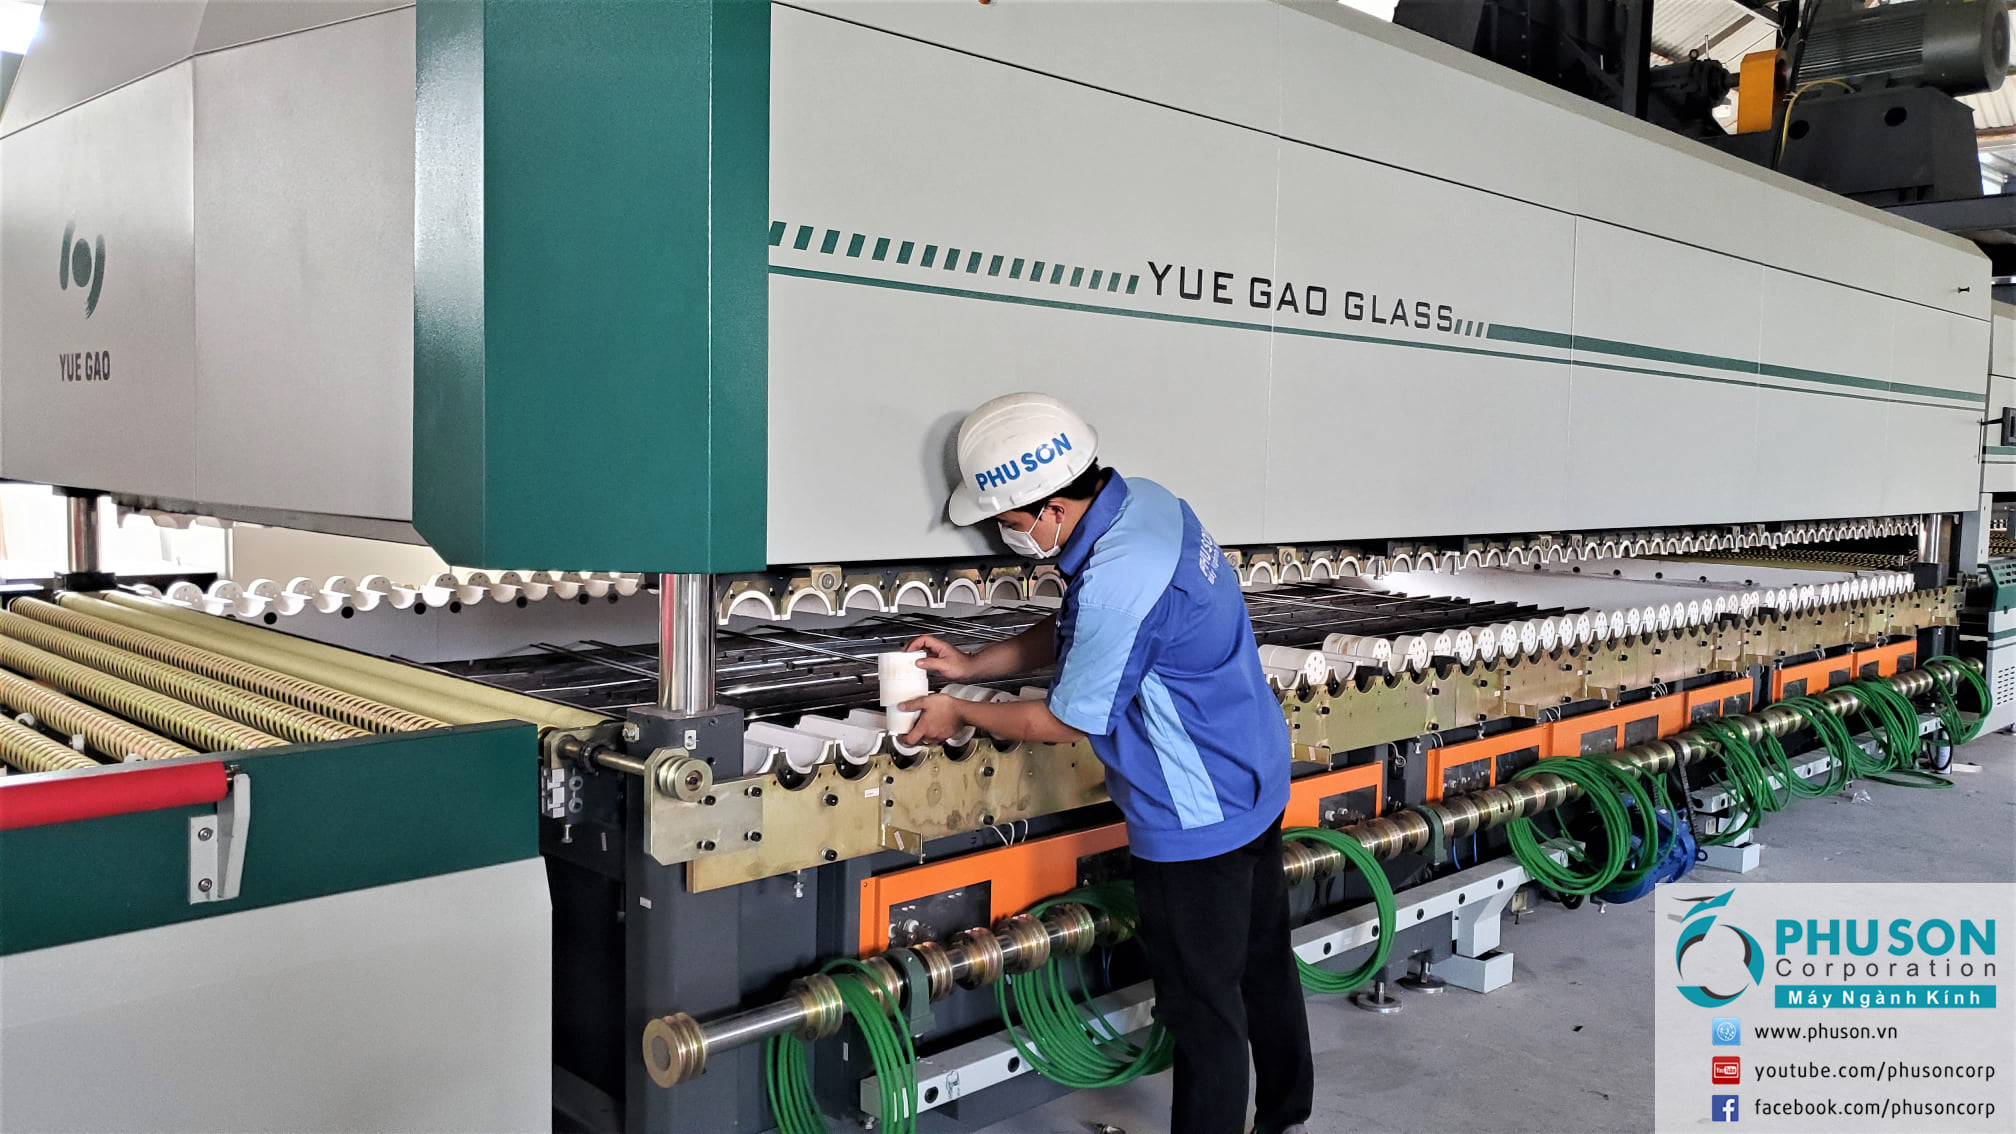 PHU SON Corporation HCM completed the mechanical installation of the YUEGAO tempered glass production line at NGAI KHANH GLASS house.